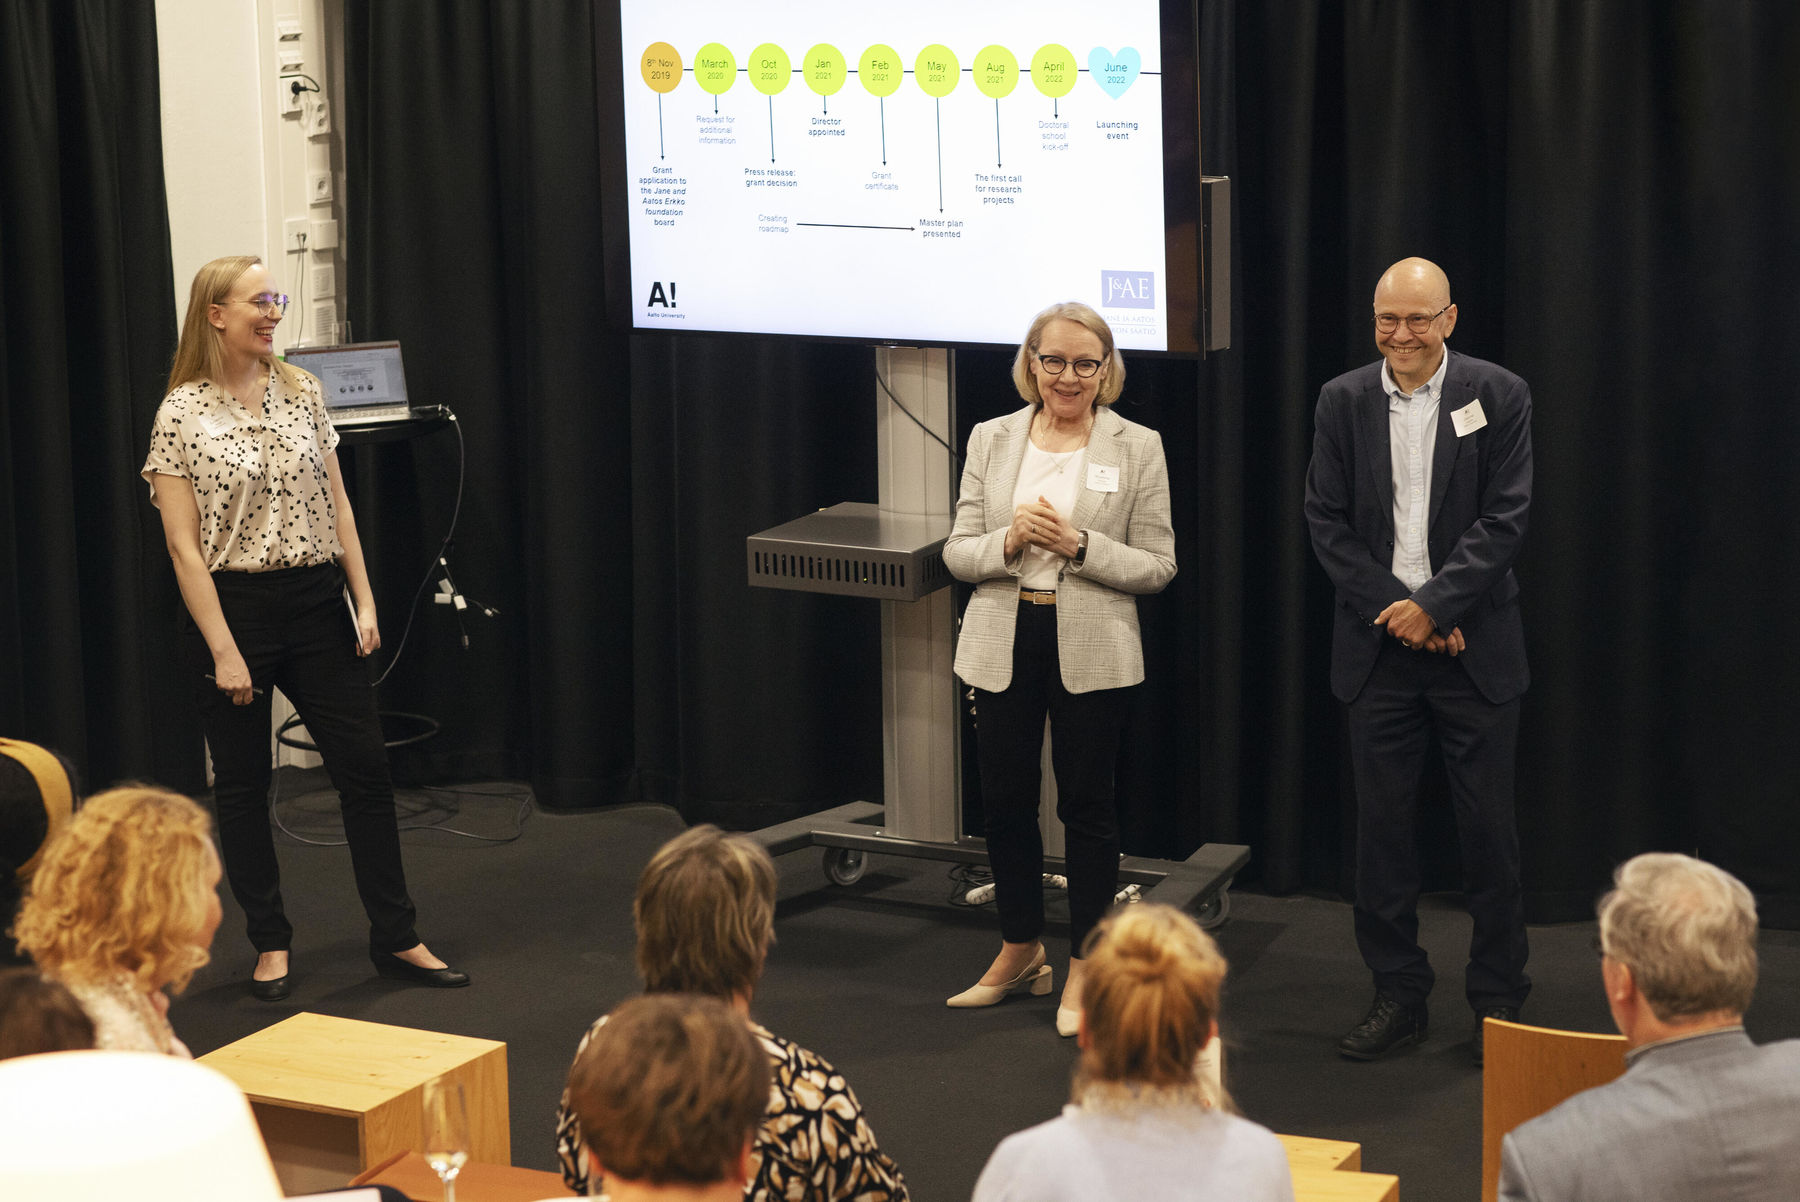 Kristiina Kruus, Dean, School of Chemical Engineering (middle) and Janne Laine, VP, Innovations, Aalto University (right) describing the journey from an idea to reality and how it all started in an interview with Susanna Ahola (Coordinator, Bioinnovation Center).  